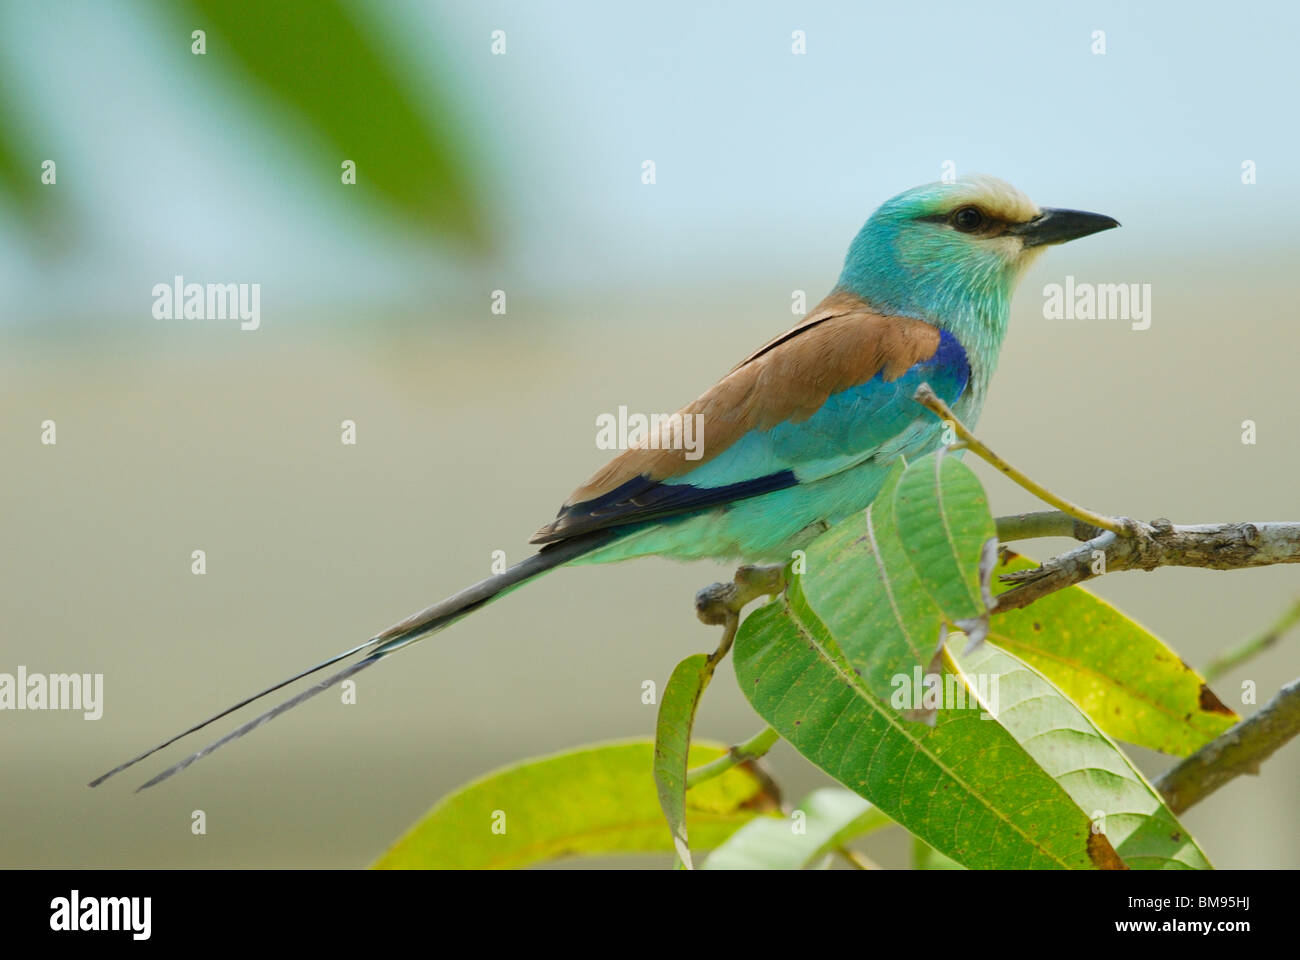 Abyssinian Roller (Coracias abyssinica) in The Gambia, Africa Stock Photo